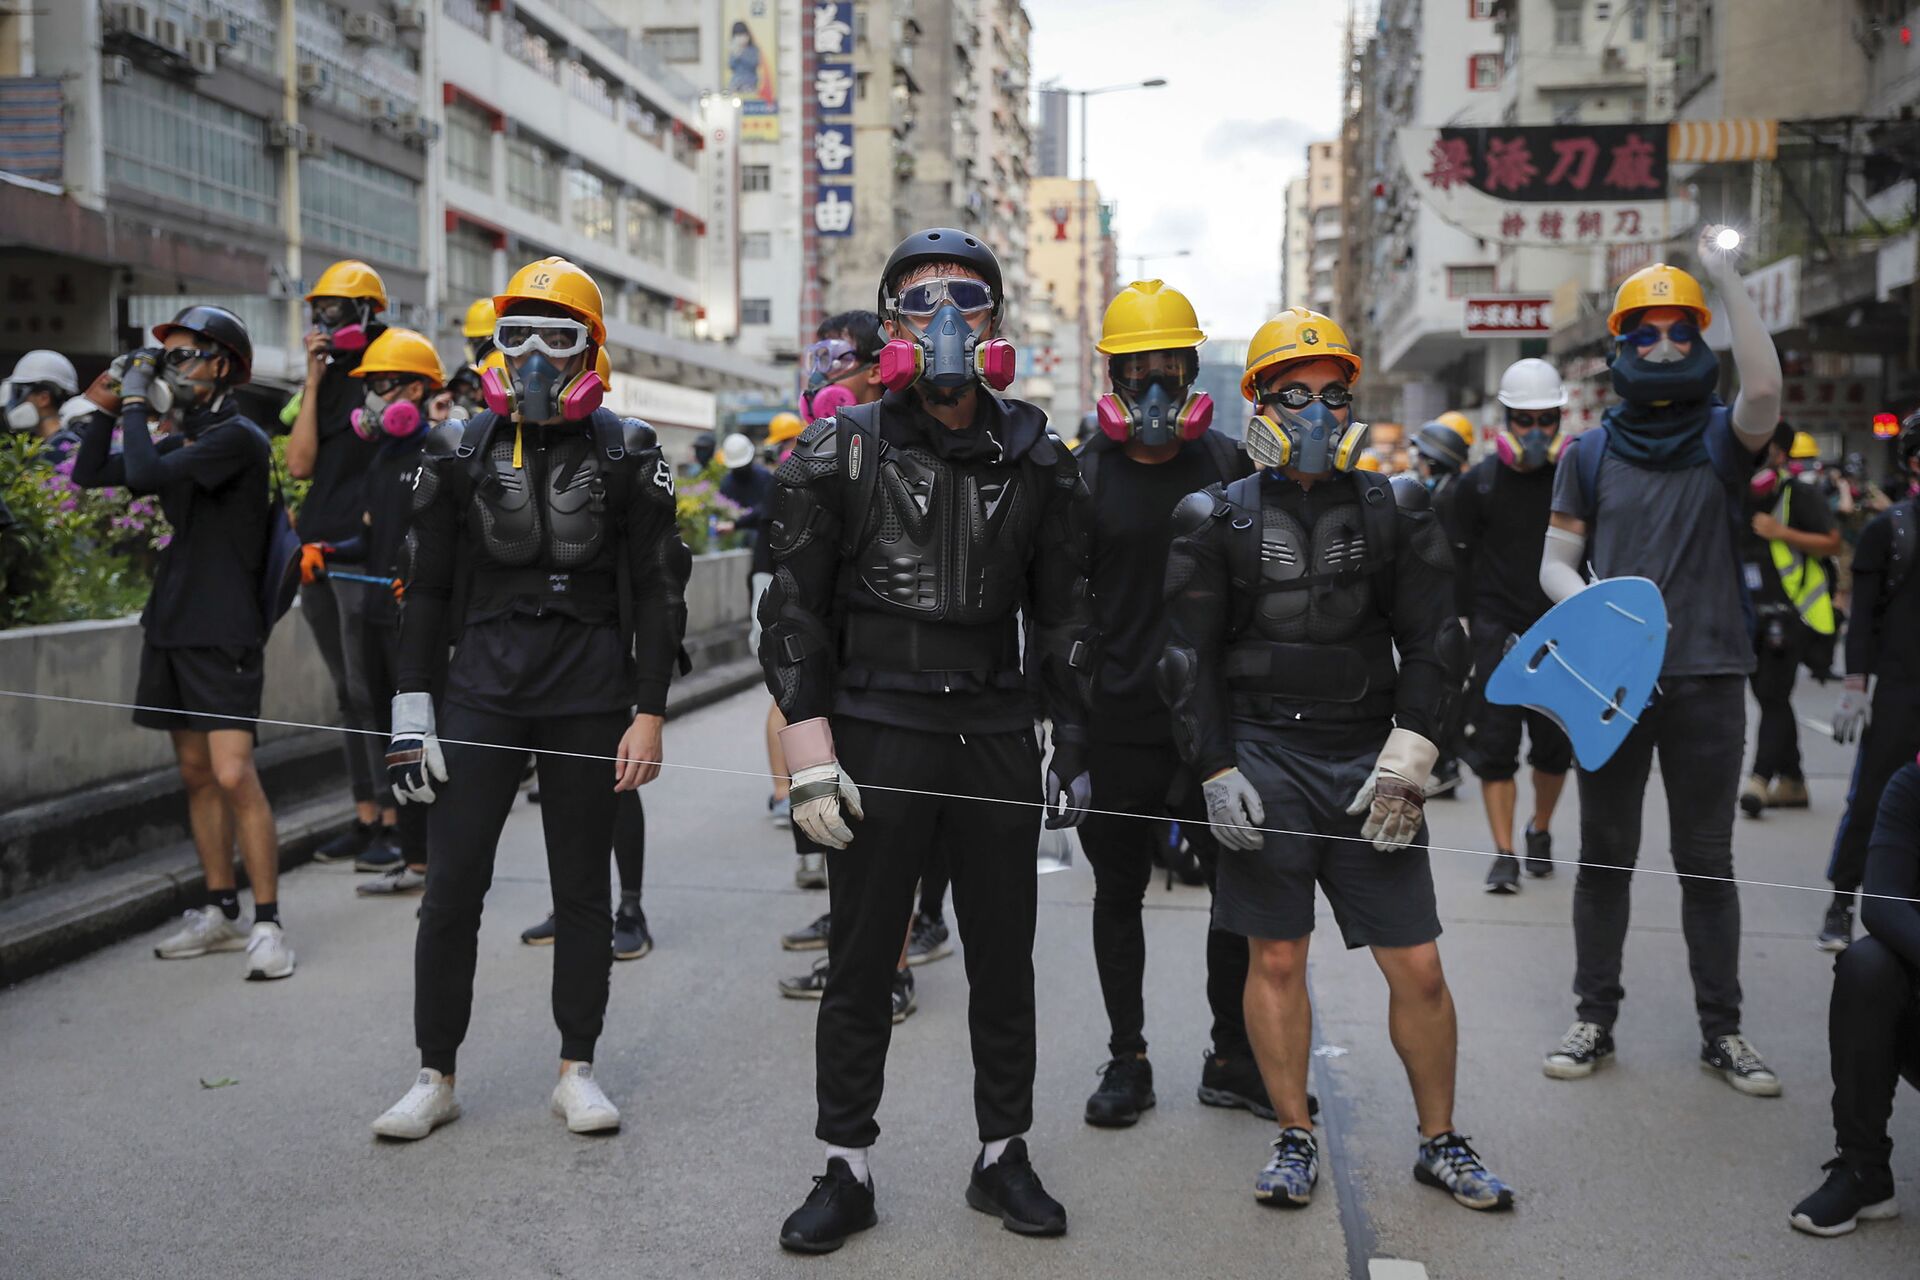 Protesters with protection gears face with riot policemen on a street during the anti-extradition bill protest in Hong Kong, Sunday, Aug. 11, 2019. Police fired tear gas late Sunday afternoon to try to disperse a demonstration in Hong Kong as protesters took over streets in two parts of the Asian financial capital, blocking traffic and setting up another night of likely showdowns with riot police. - Sputnik International, 1920, 24.09.2021